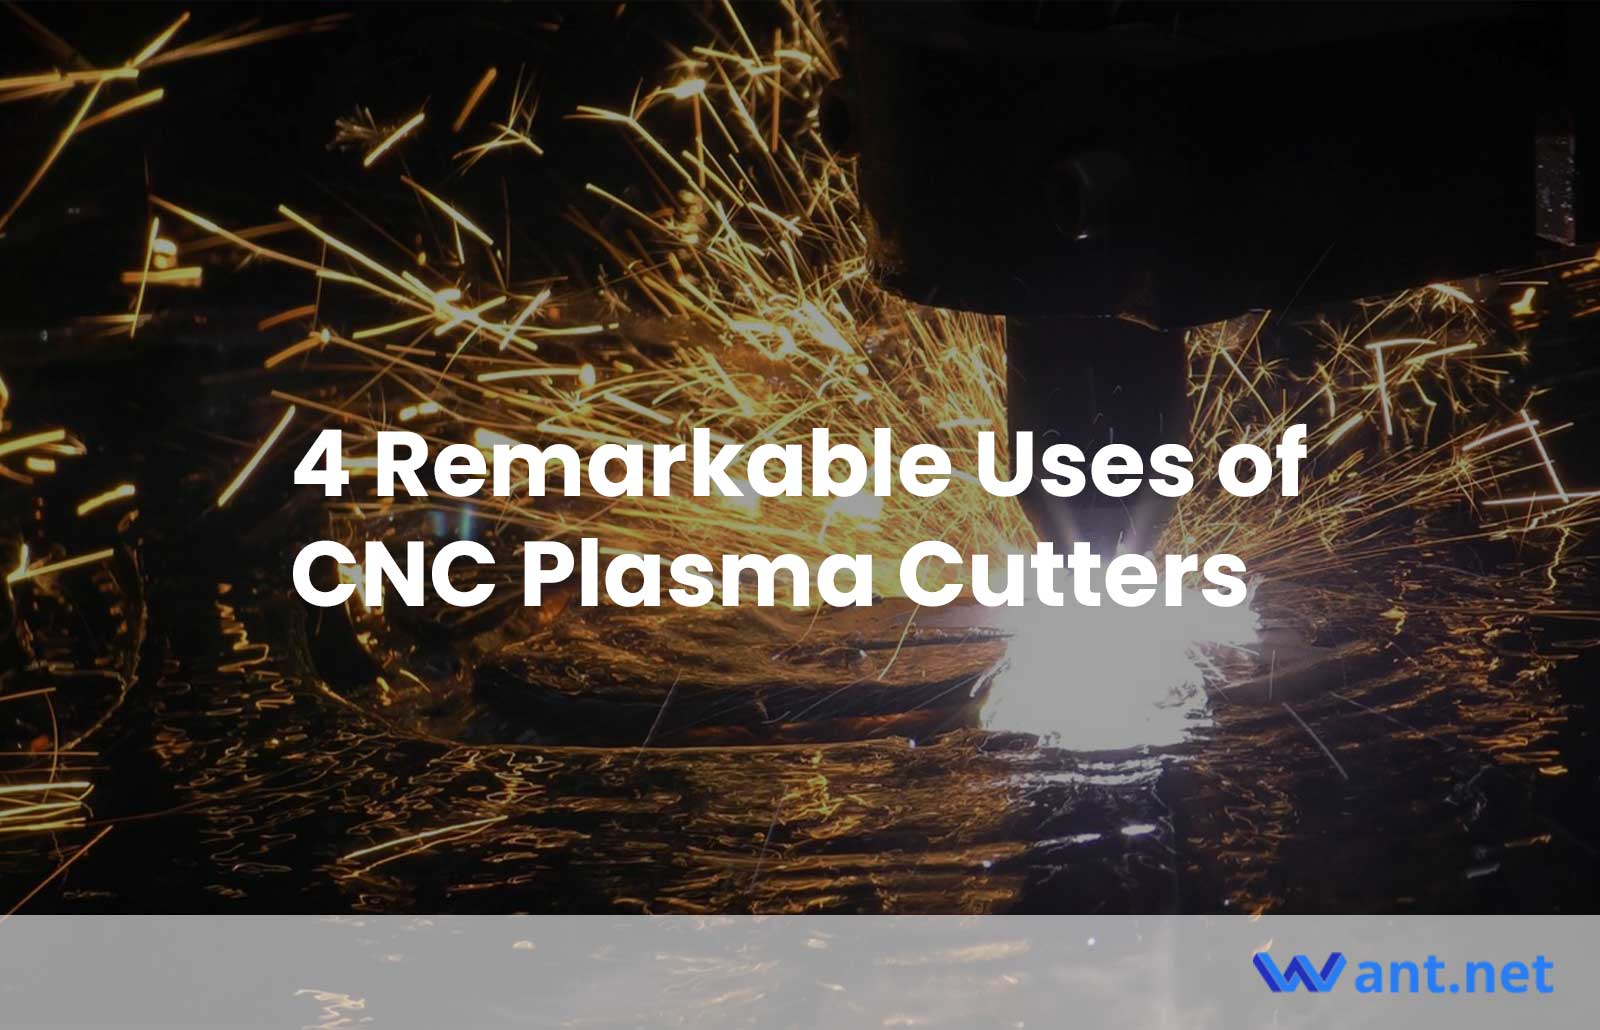 4 Remarkable Uses of CNC Plasma Cutters